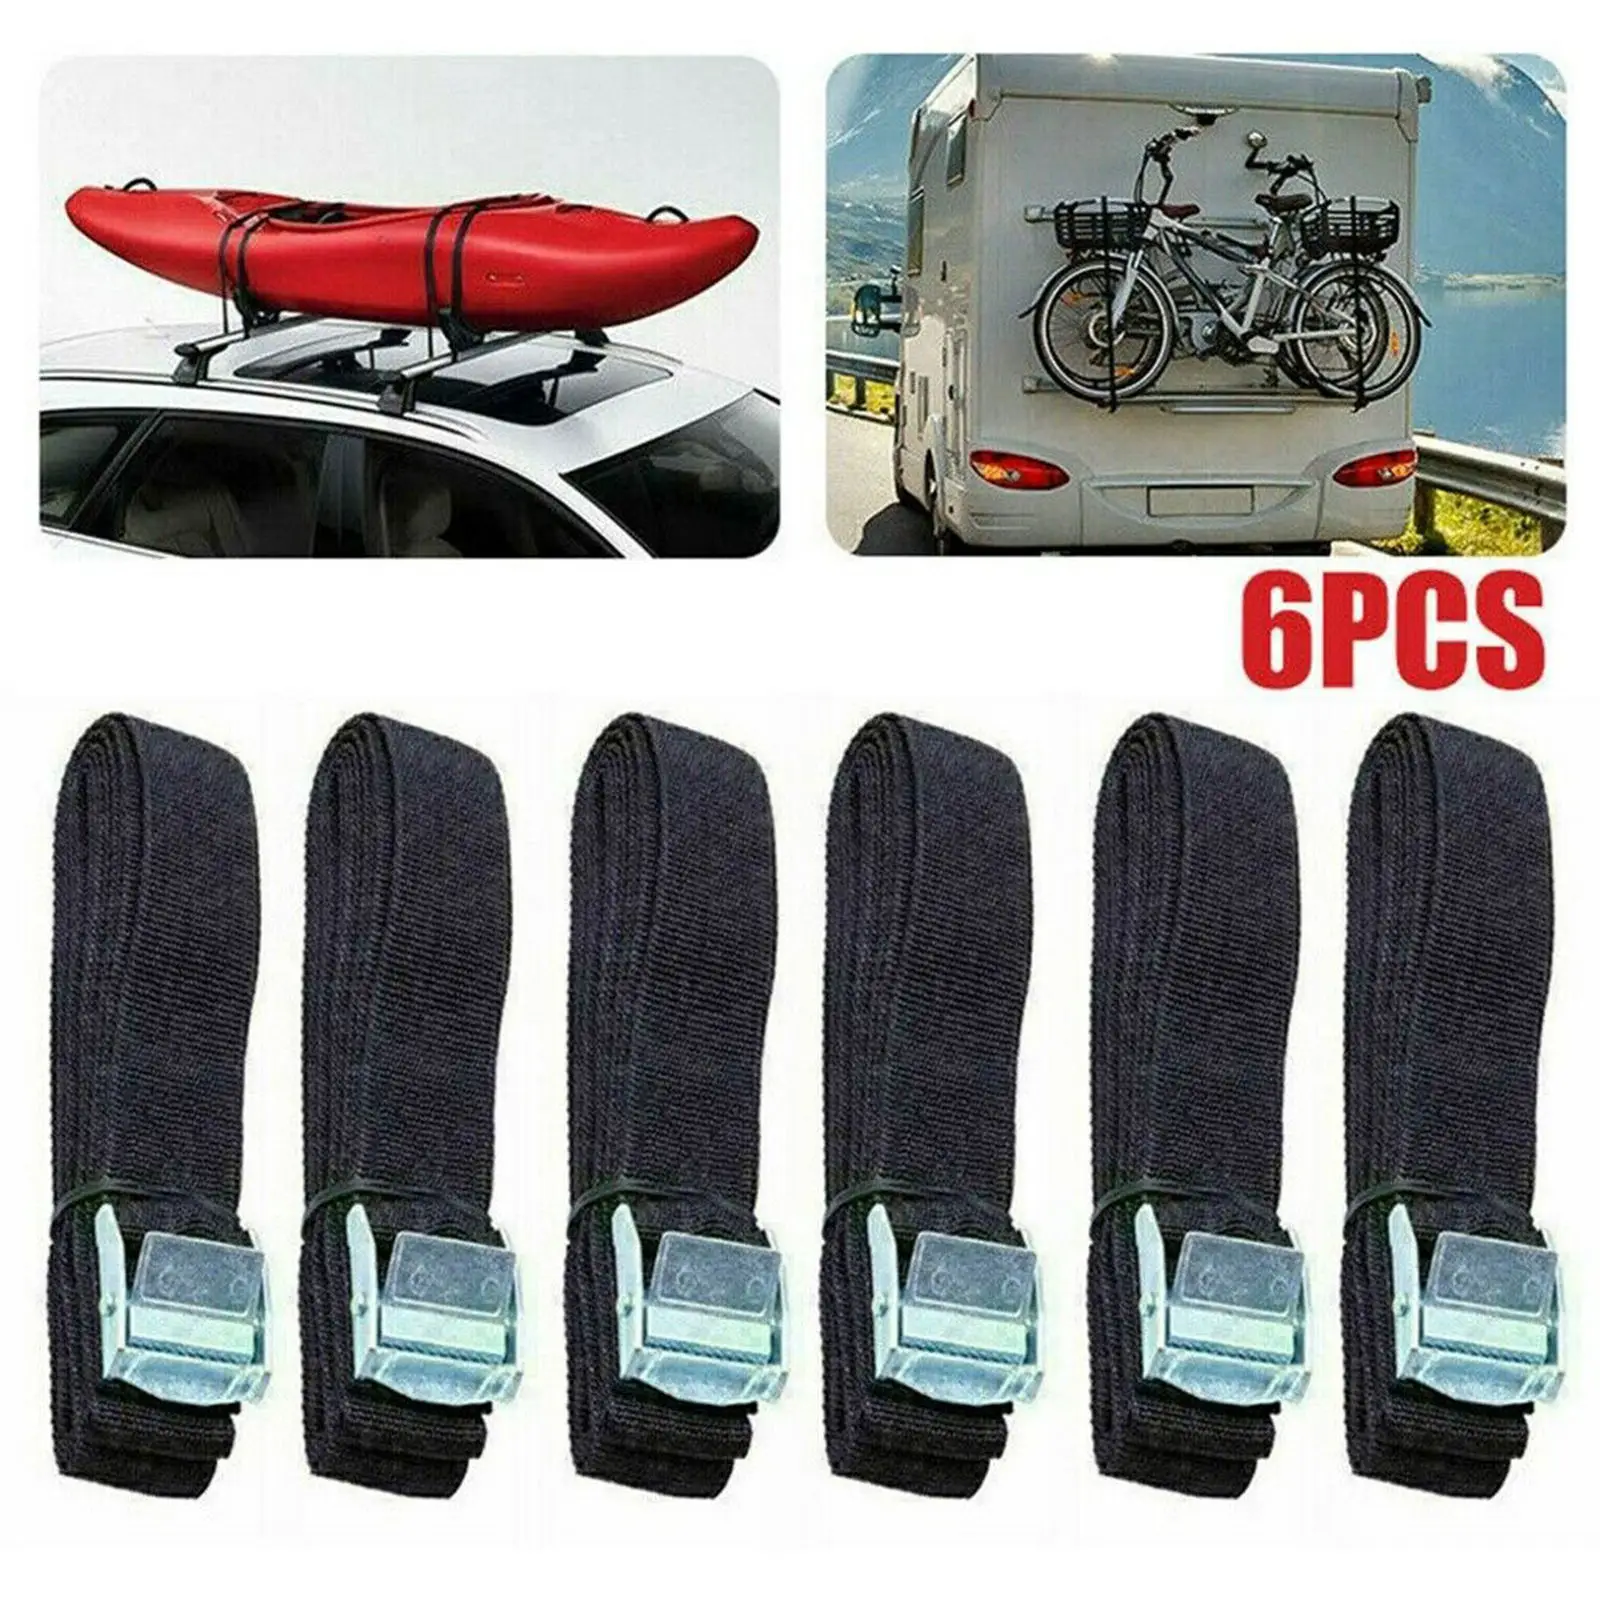 6Pieces Cargo Straps With Fastening Buckle Polyester Fiber Fixing Kit For Motorcycle Car Bicycle Frame Luggage Cargo Strap